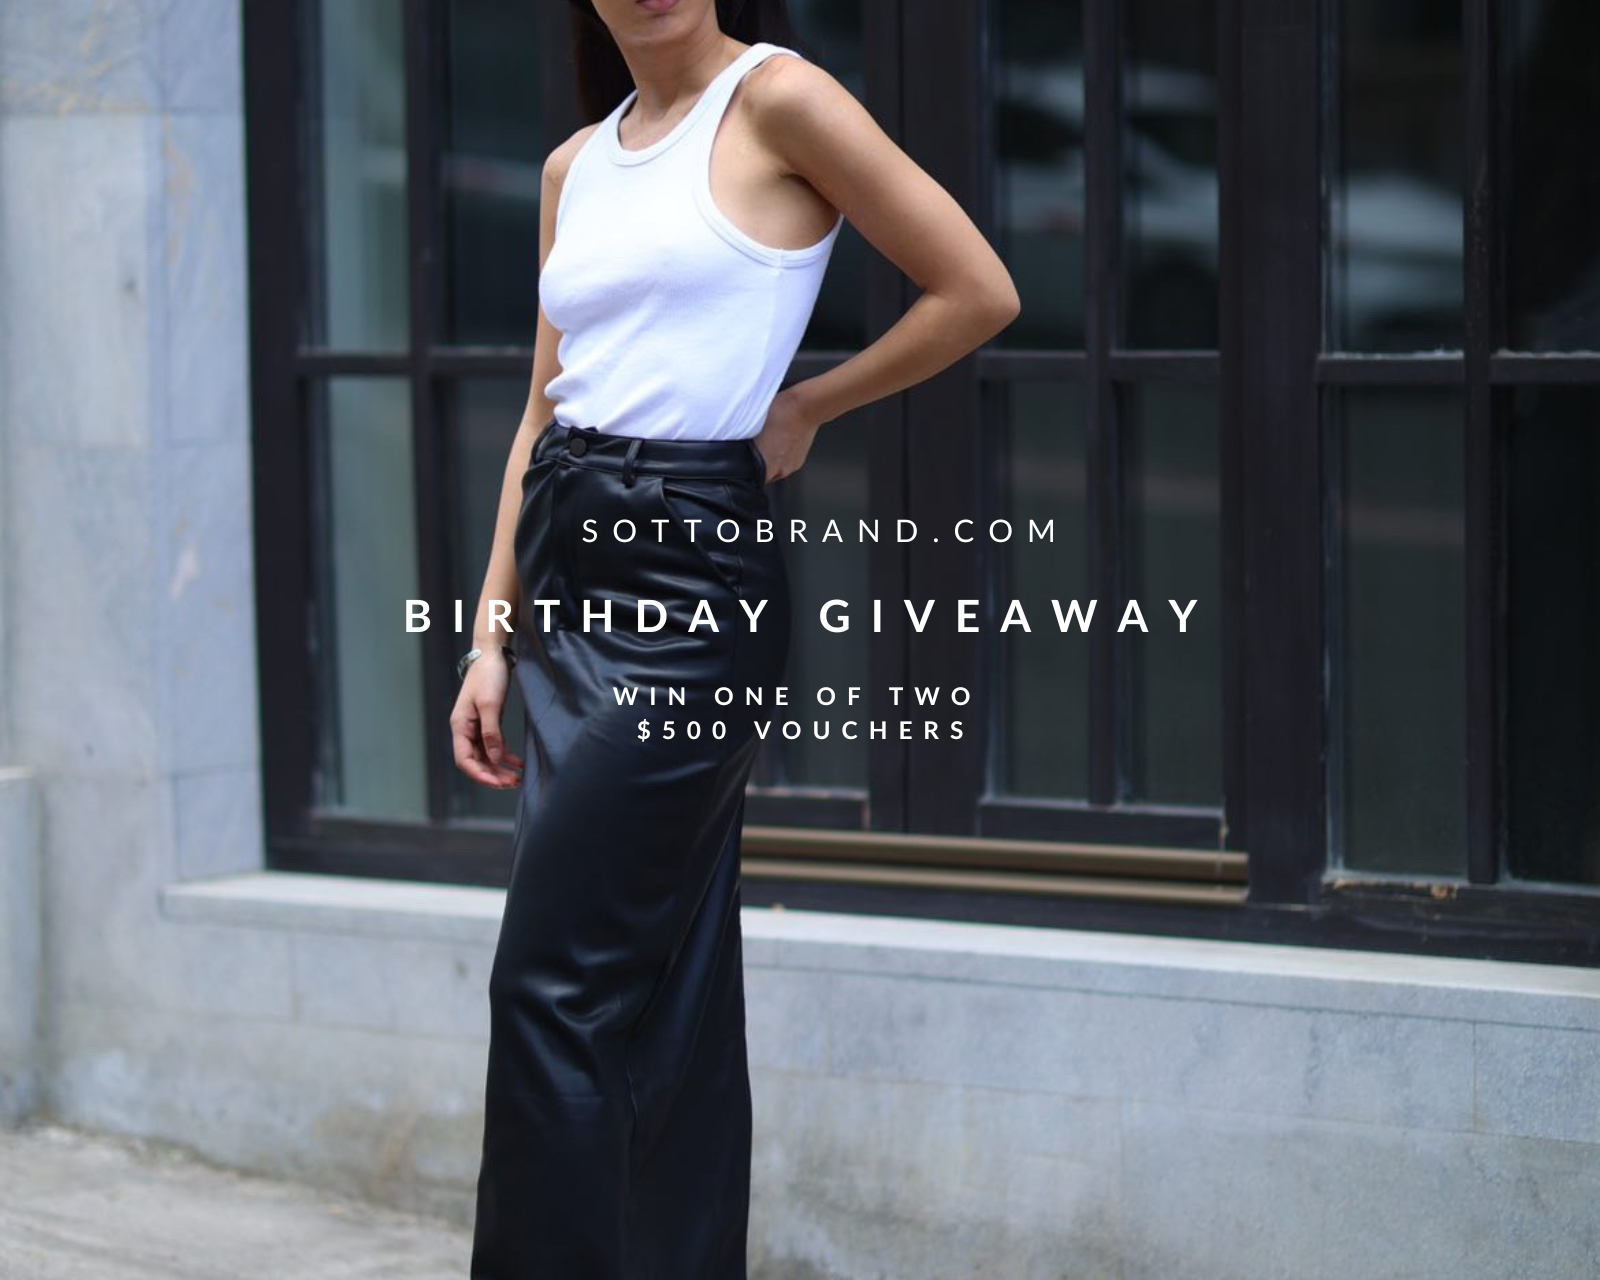 SOTTO'S BIRTHDAY : GIVEAWAY